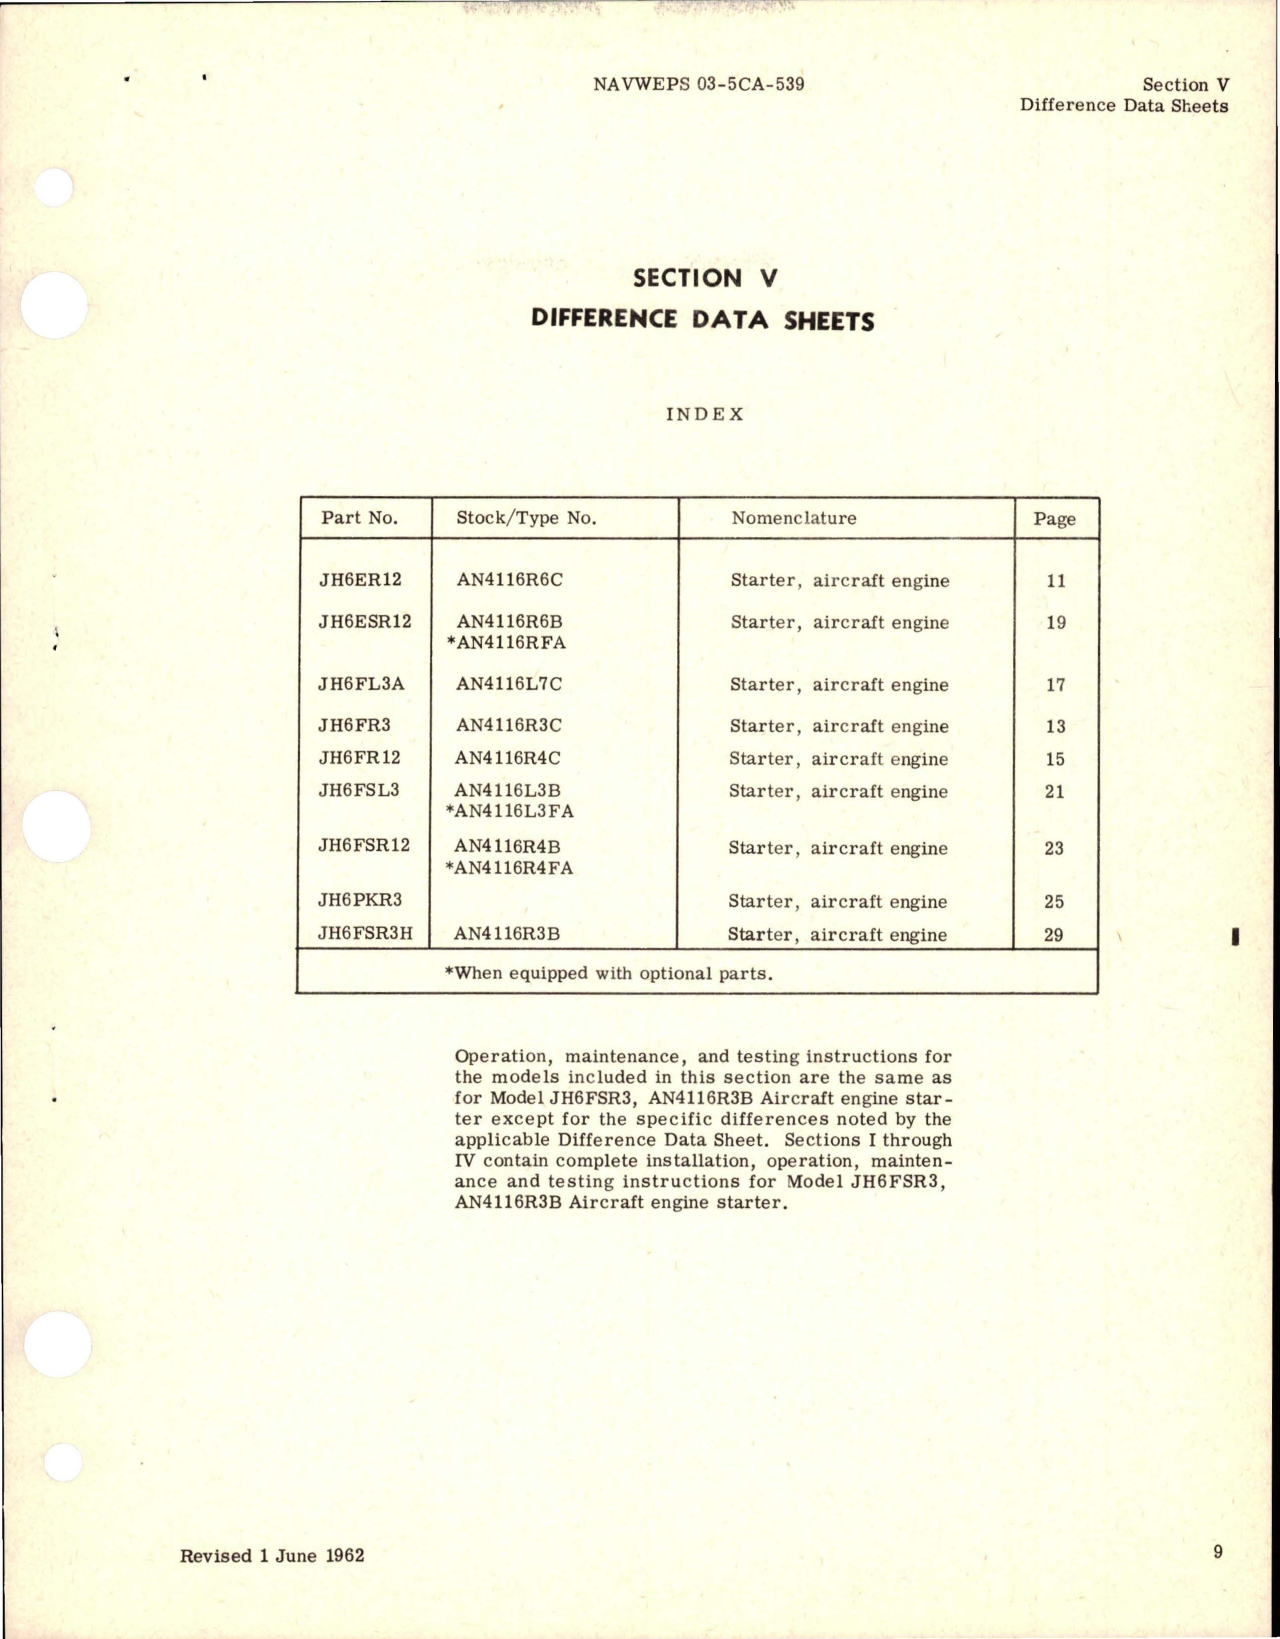 Sample page 5 from AirCorps Library document: Revision to Operation and Service Instructions for Aircraft Engine Starter